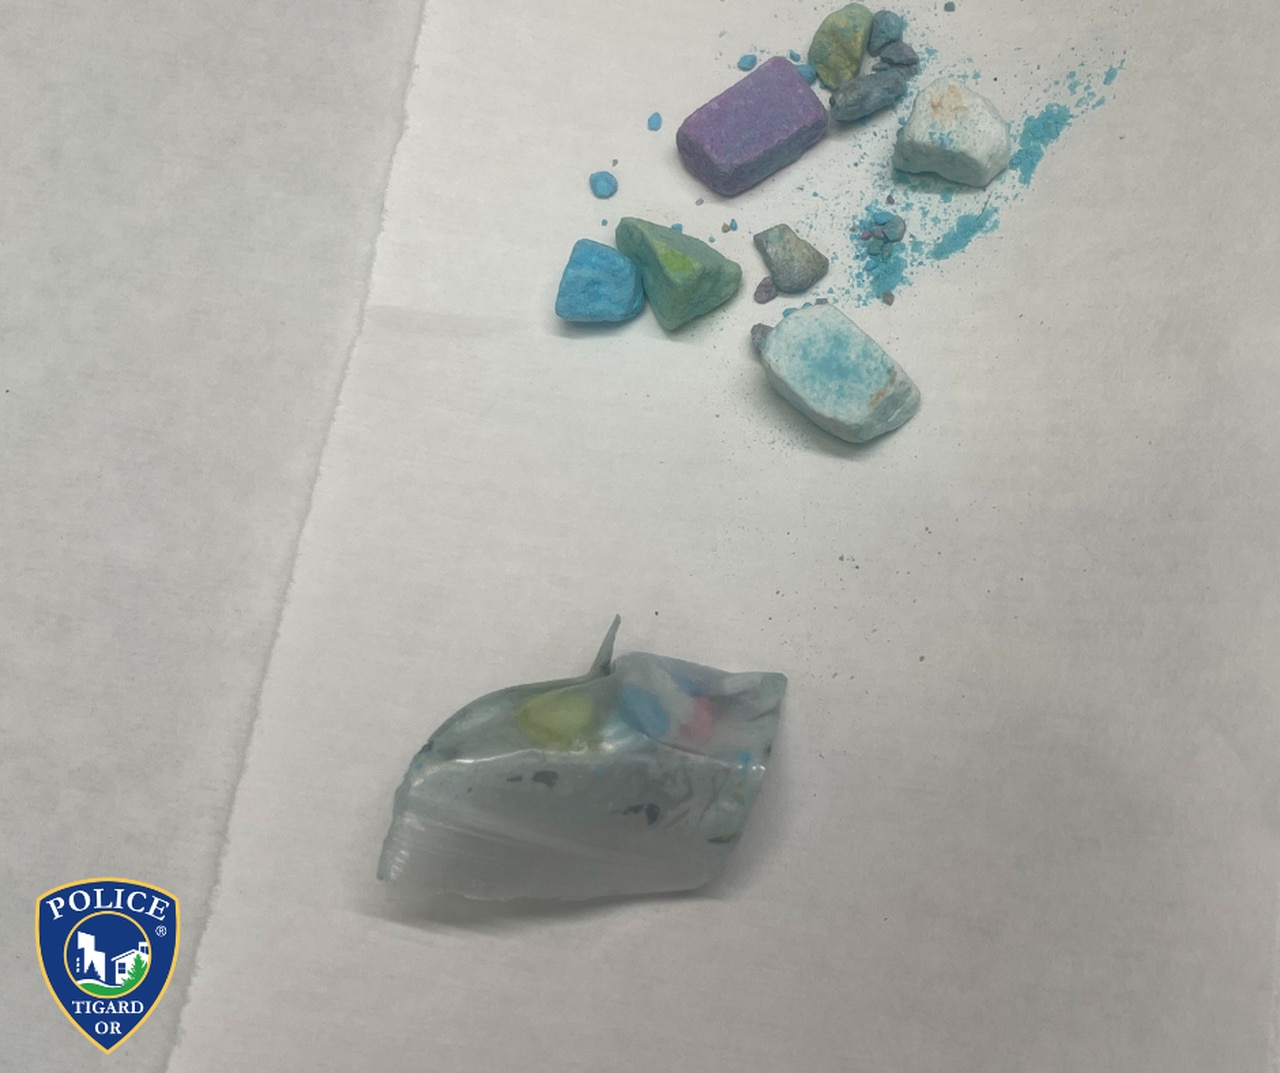 Rainbow fentanyl recovered in Tigard